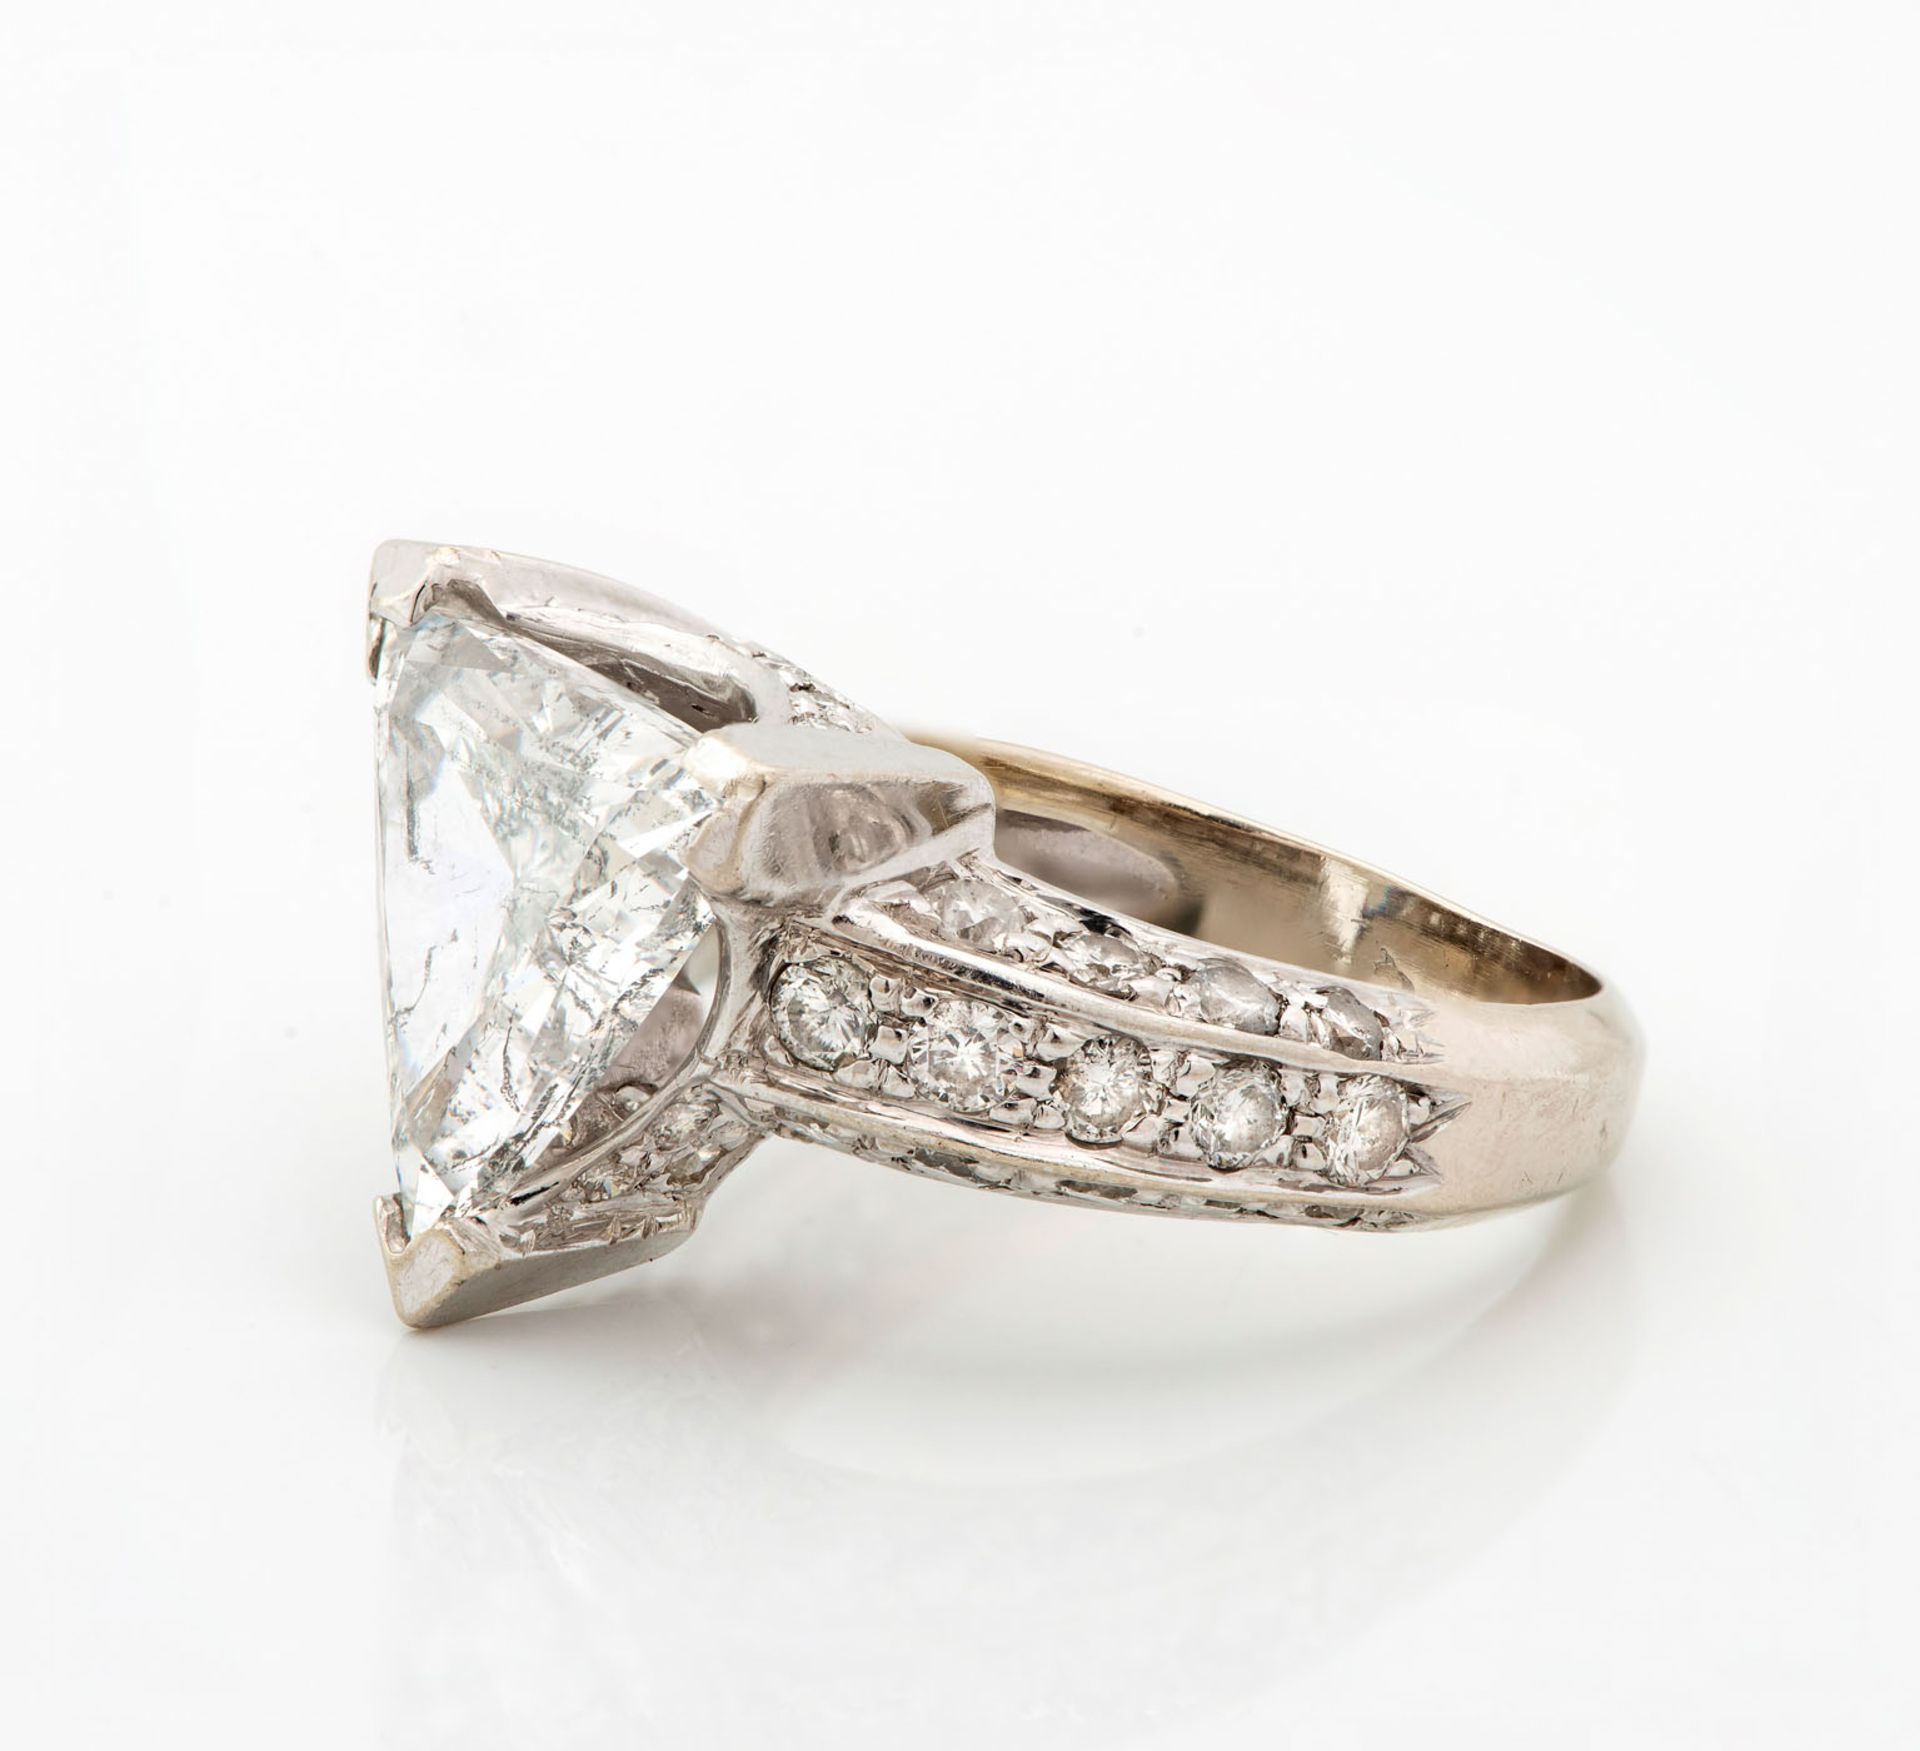 A 5.03Ct Trillion Cut Diamond and 14K White Gold Engagement Ring - Image 2 of 4